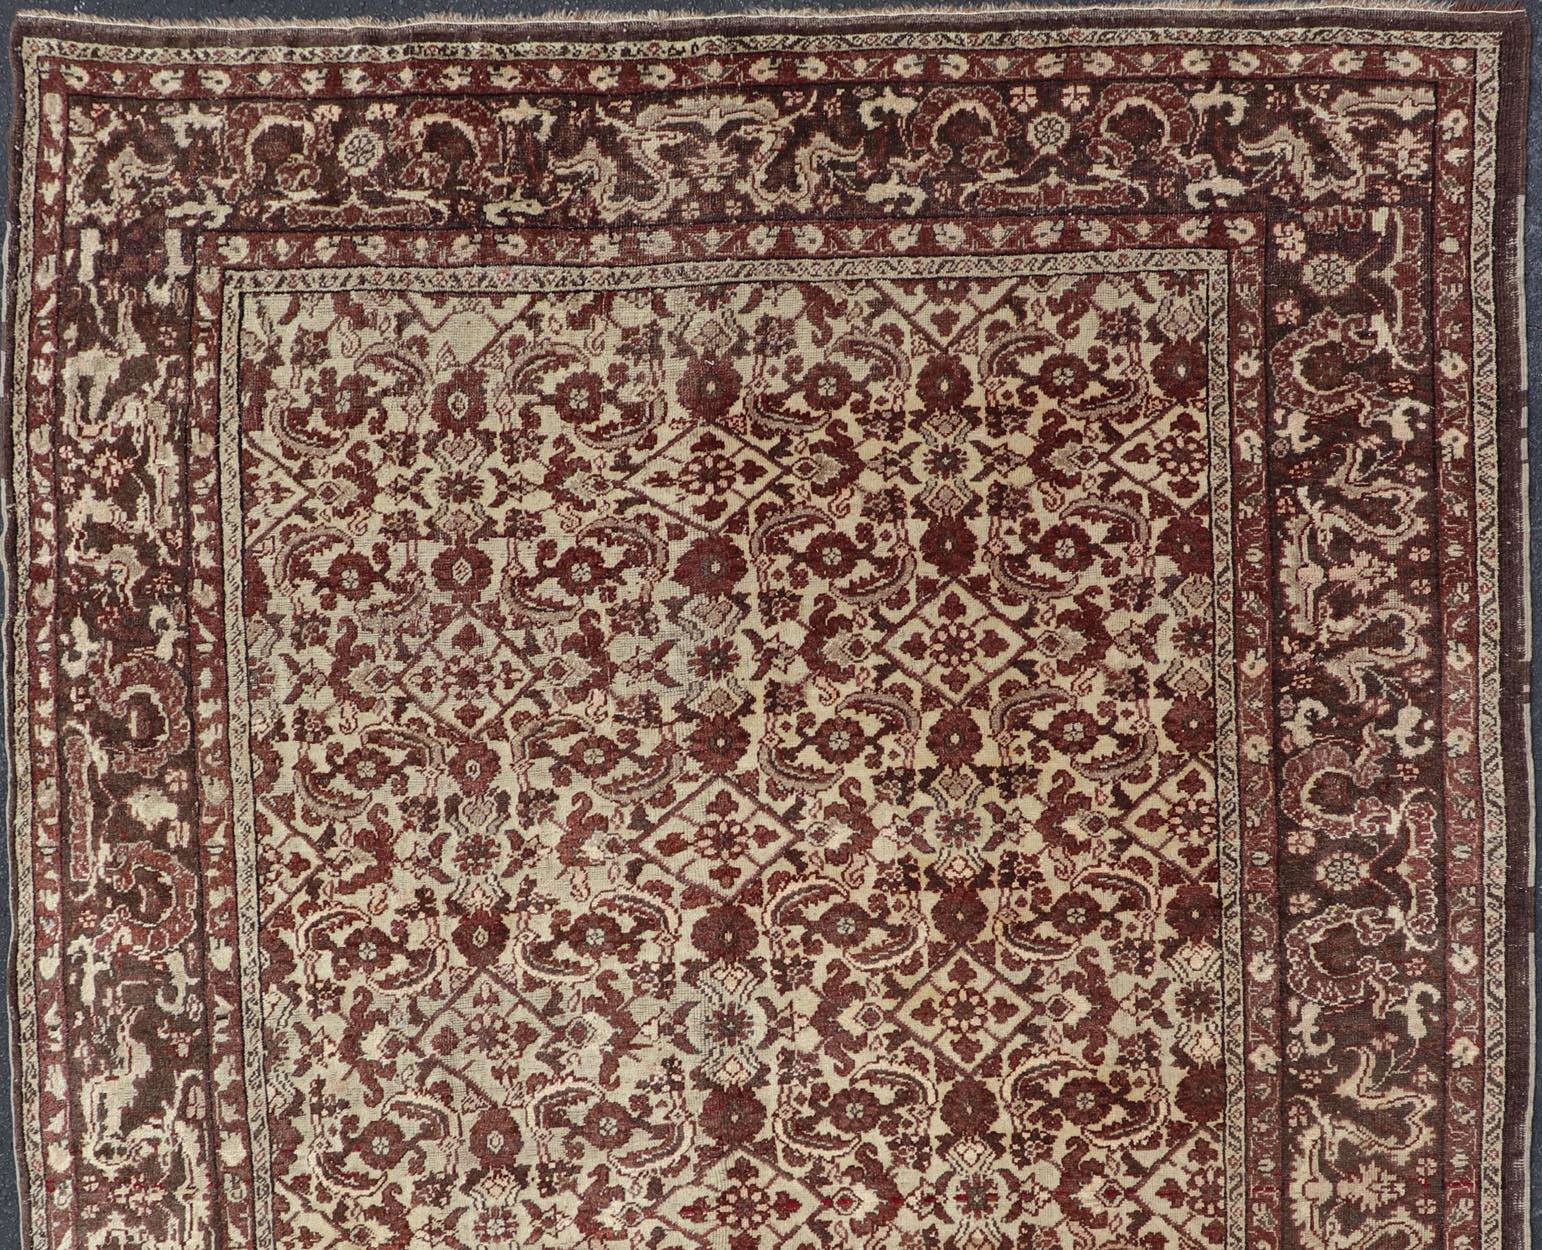 Stylized antique Turkish Sivas rug with Ivory background and Red maroon, Eggplant, Brown Colors rug V21-0601, country of origin / type: Turkey / Sivas, circa 1910

Stylized all-over motifs are featured in all over Herati pattern on this antique